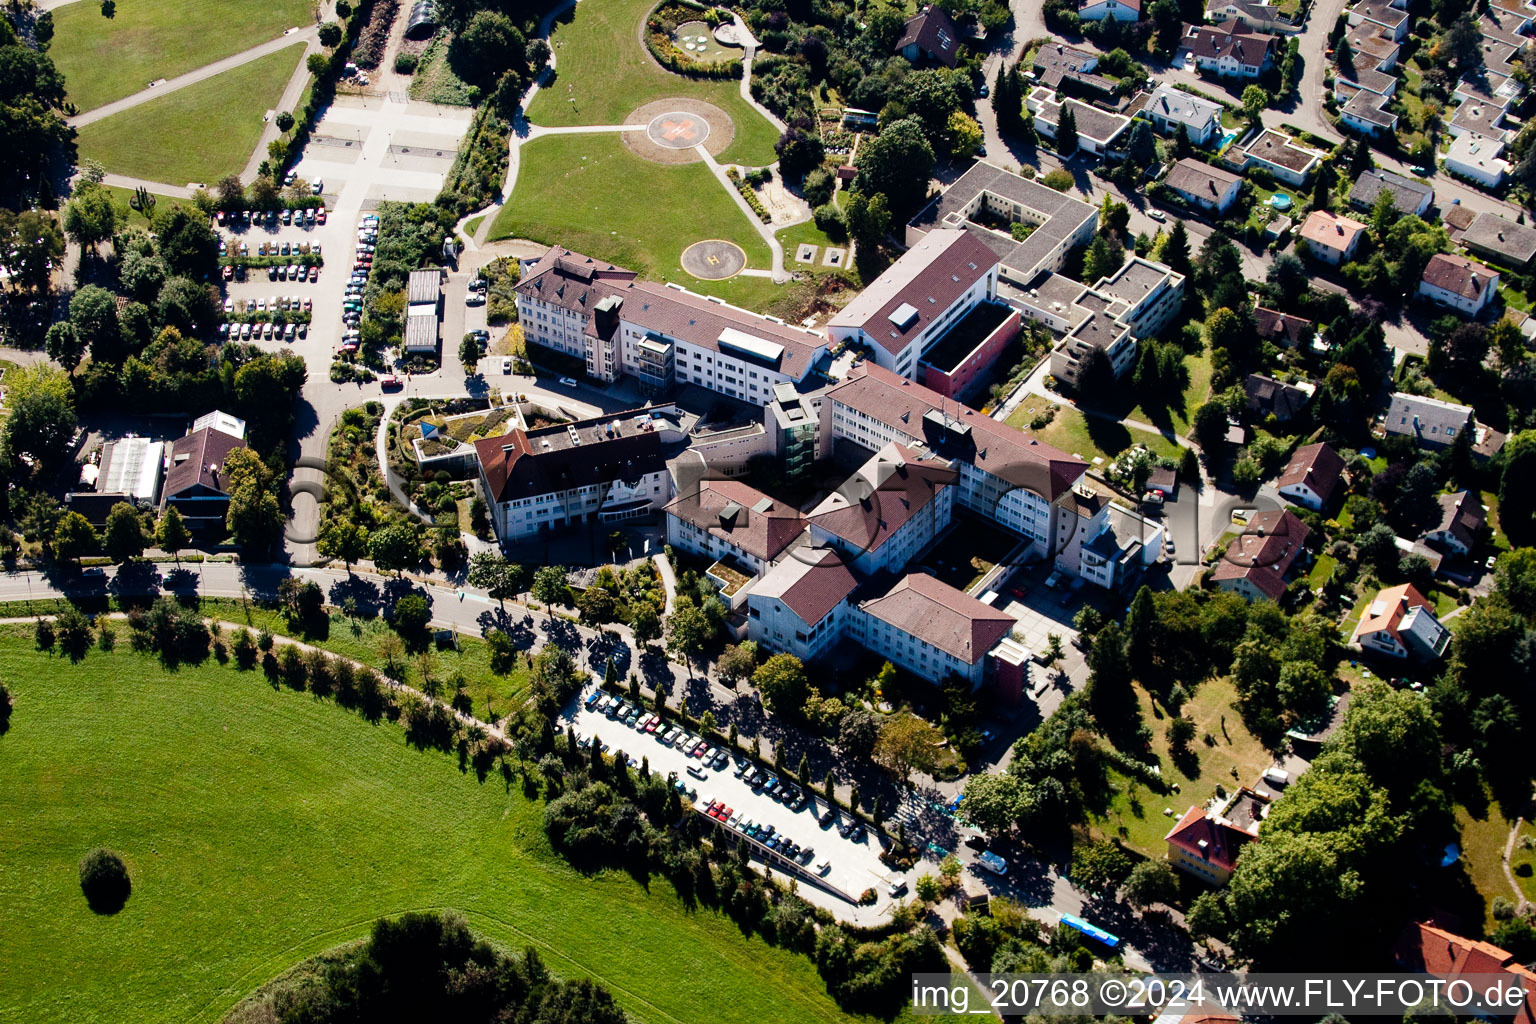 Hospital grounds of the Clinic St. Josefsklinik in Offenburg in the state Baden-Wurttemberg, Germany